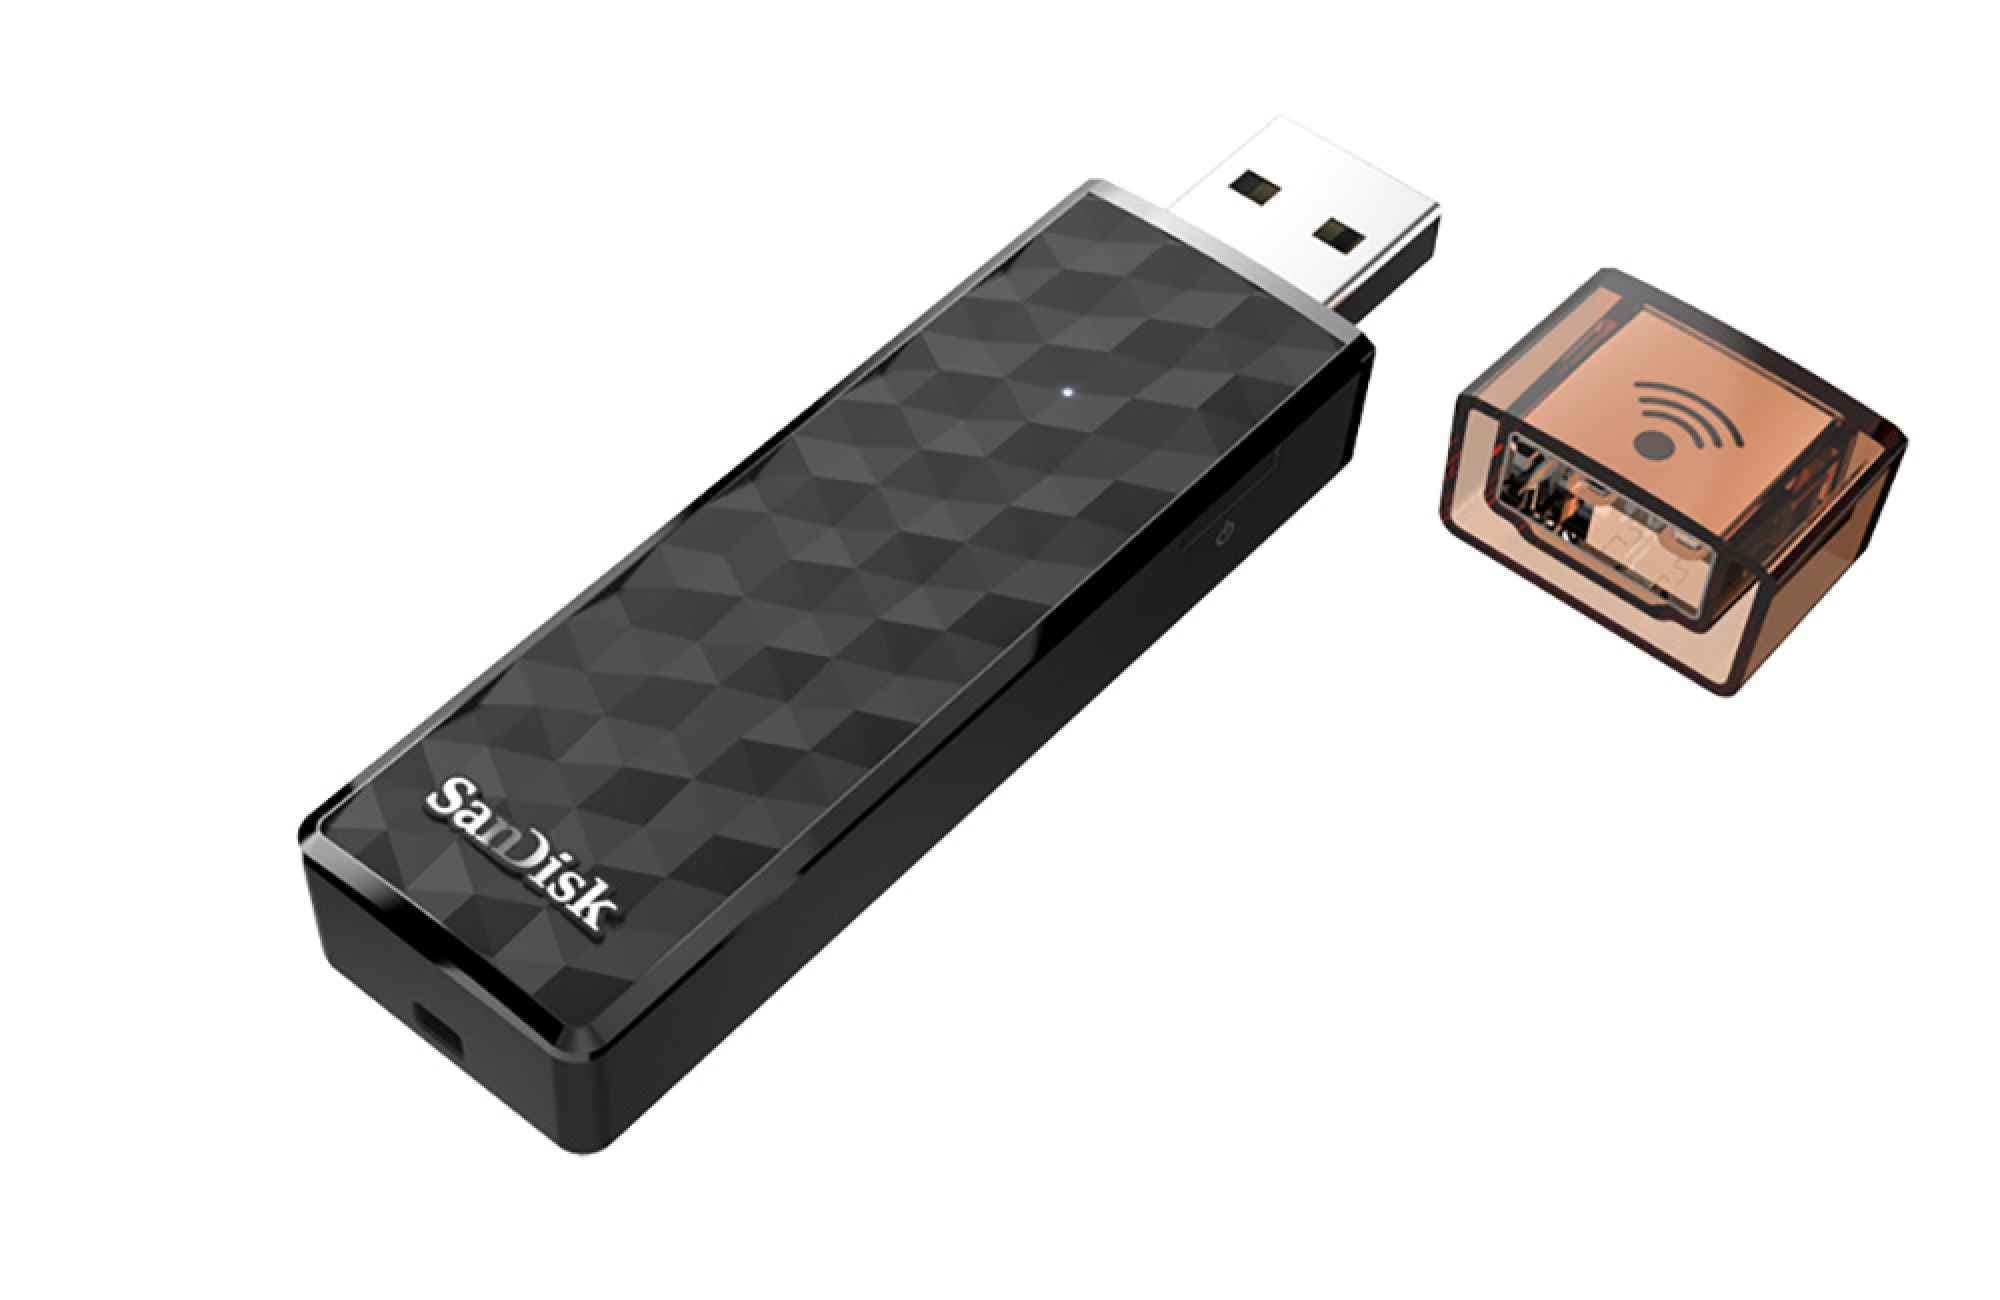 Review: Sandisk Connect Wireless Stick